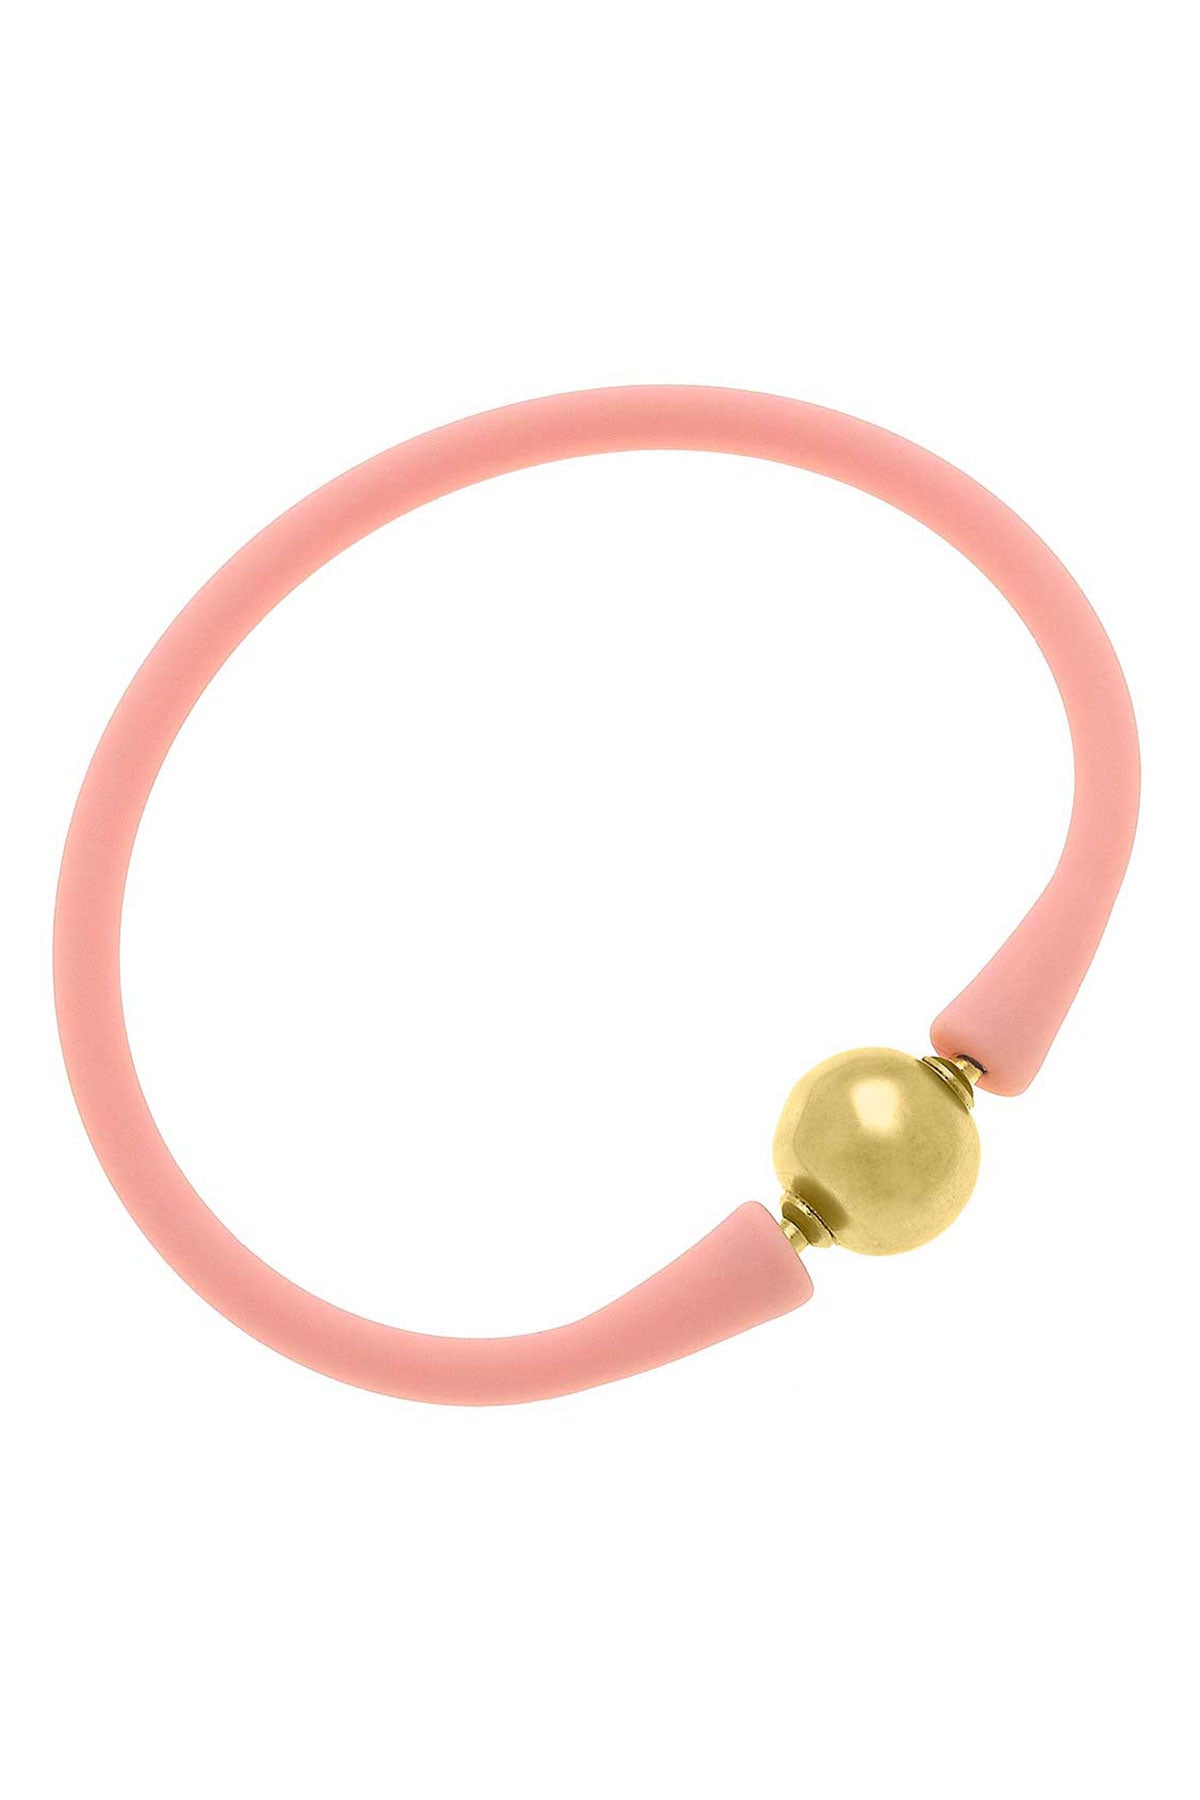 Bali 24K Gold Plated Ball Bead Silicone Bracelet in Light Pink